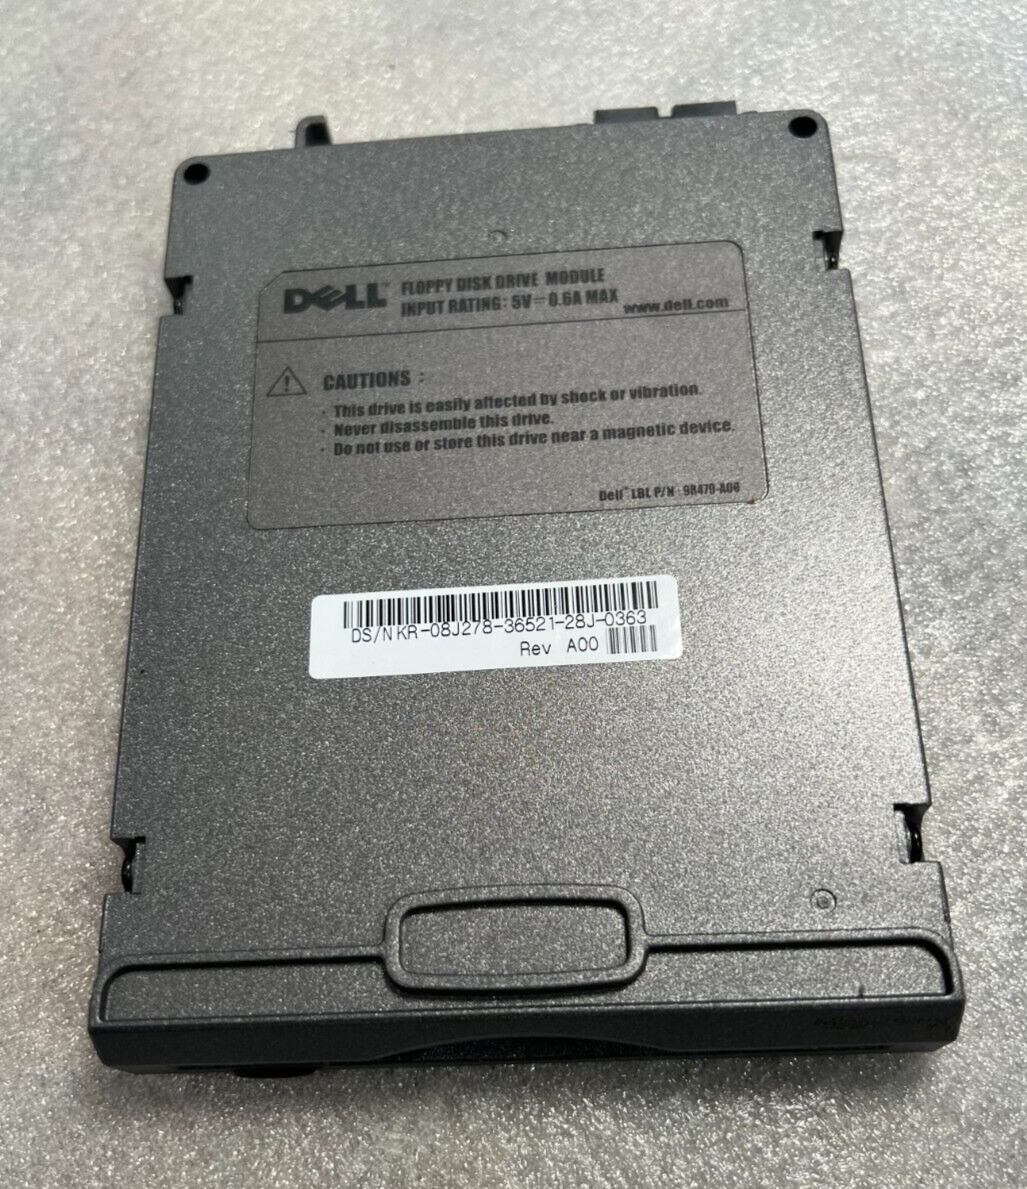 NEW OLD STOCK DELL 08J278, 8J278, 9R470-A00 DELL 1.44 FLOPPY DRIVE ASSEMBLY